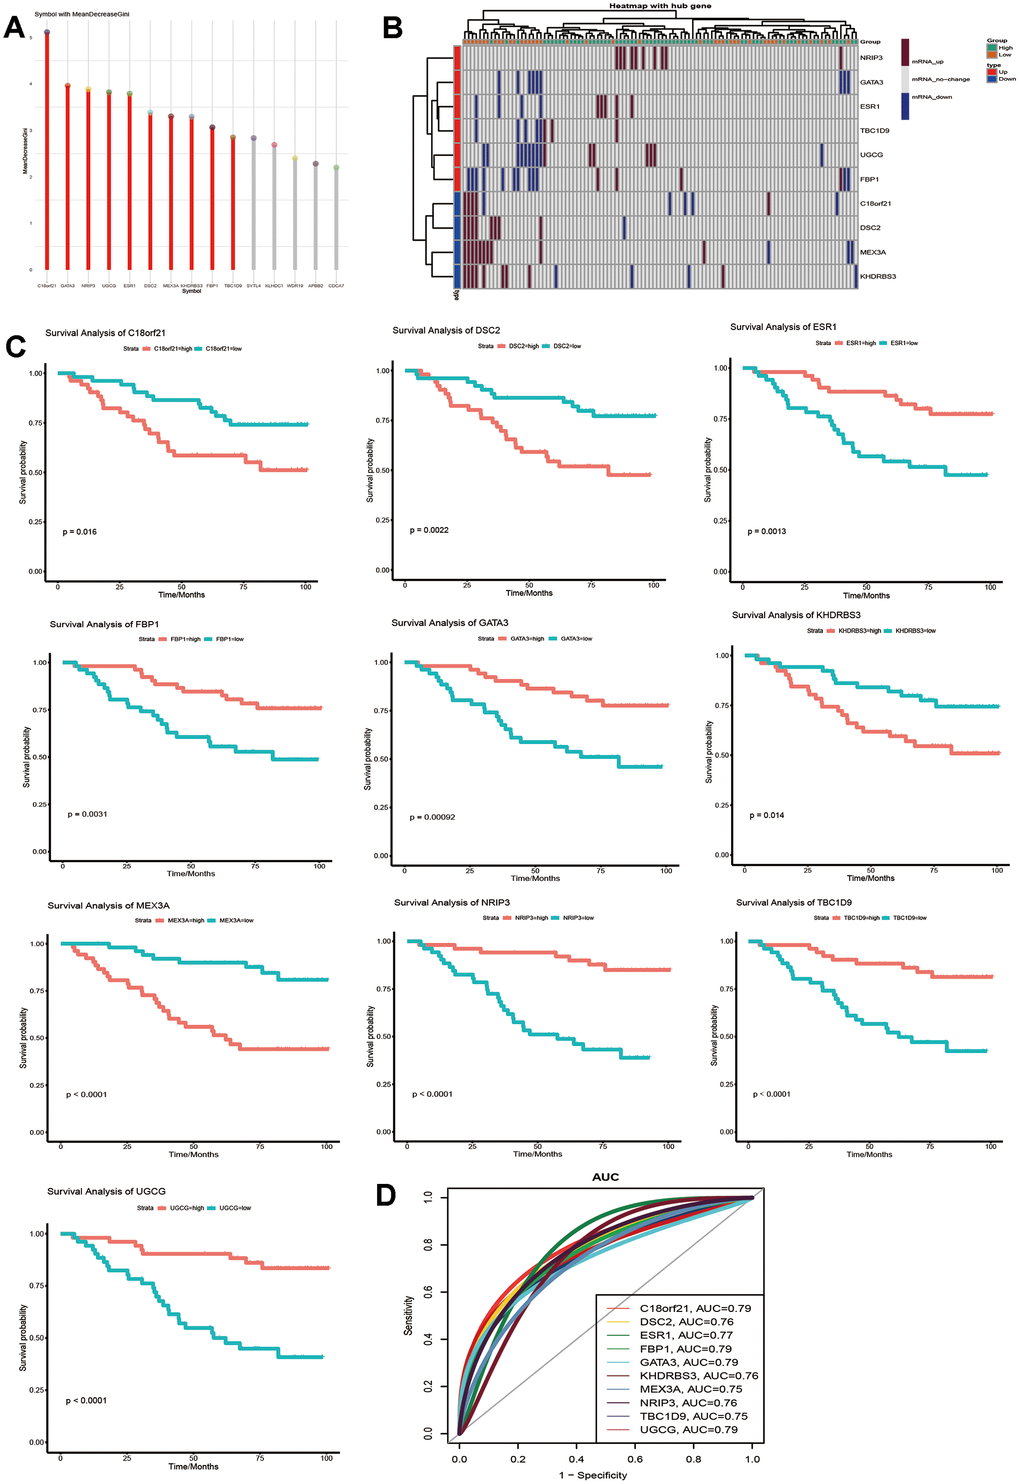 Identification of key genes that can predict the 5-year survival time of breast cancer patients. (A) Random forest screening for the top 10 genes with a high Gini coefficient of average decline. (B) Expression of the 10 selected genes in samples with a survival time of more than or less than 5 years. (C) Kaplan-Meier analysis of overall survival for the signatures associated with expression of the 10 genes in breast cancer. (D) AUC of the 10 selected genes that affect the survival time of breast cancer.